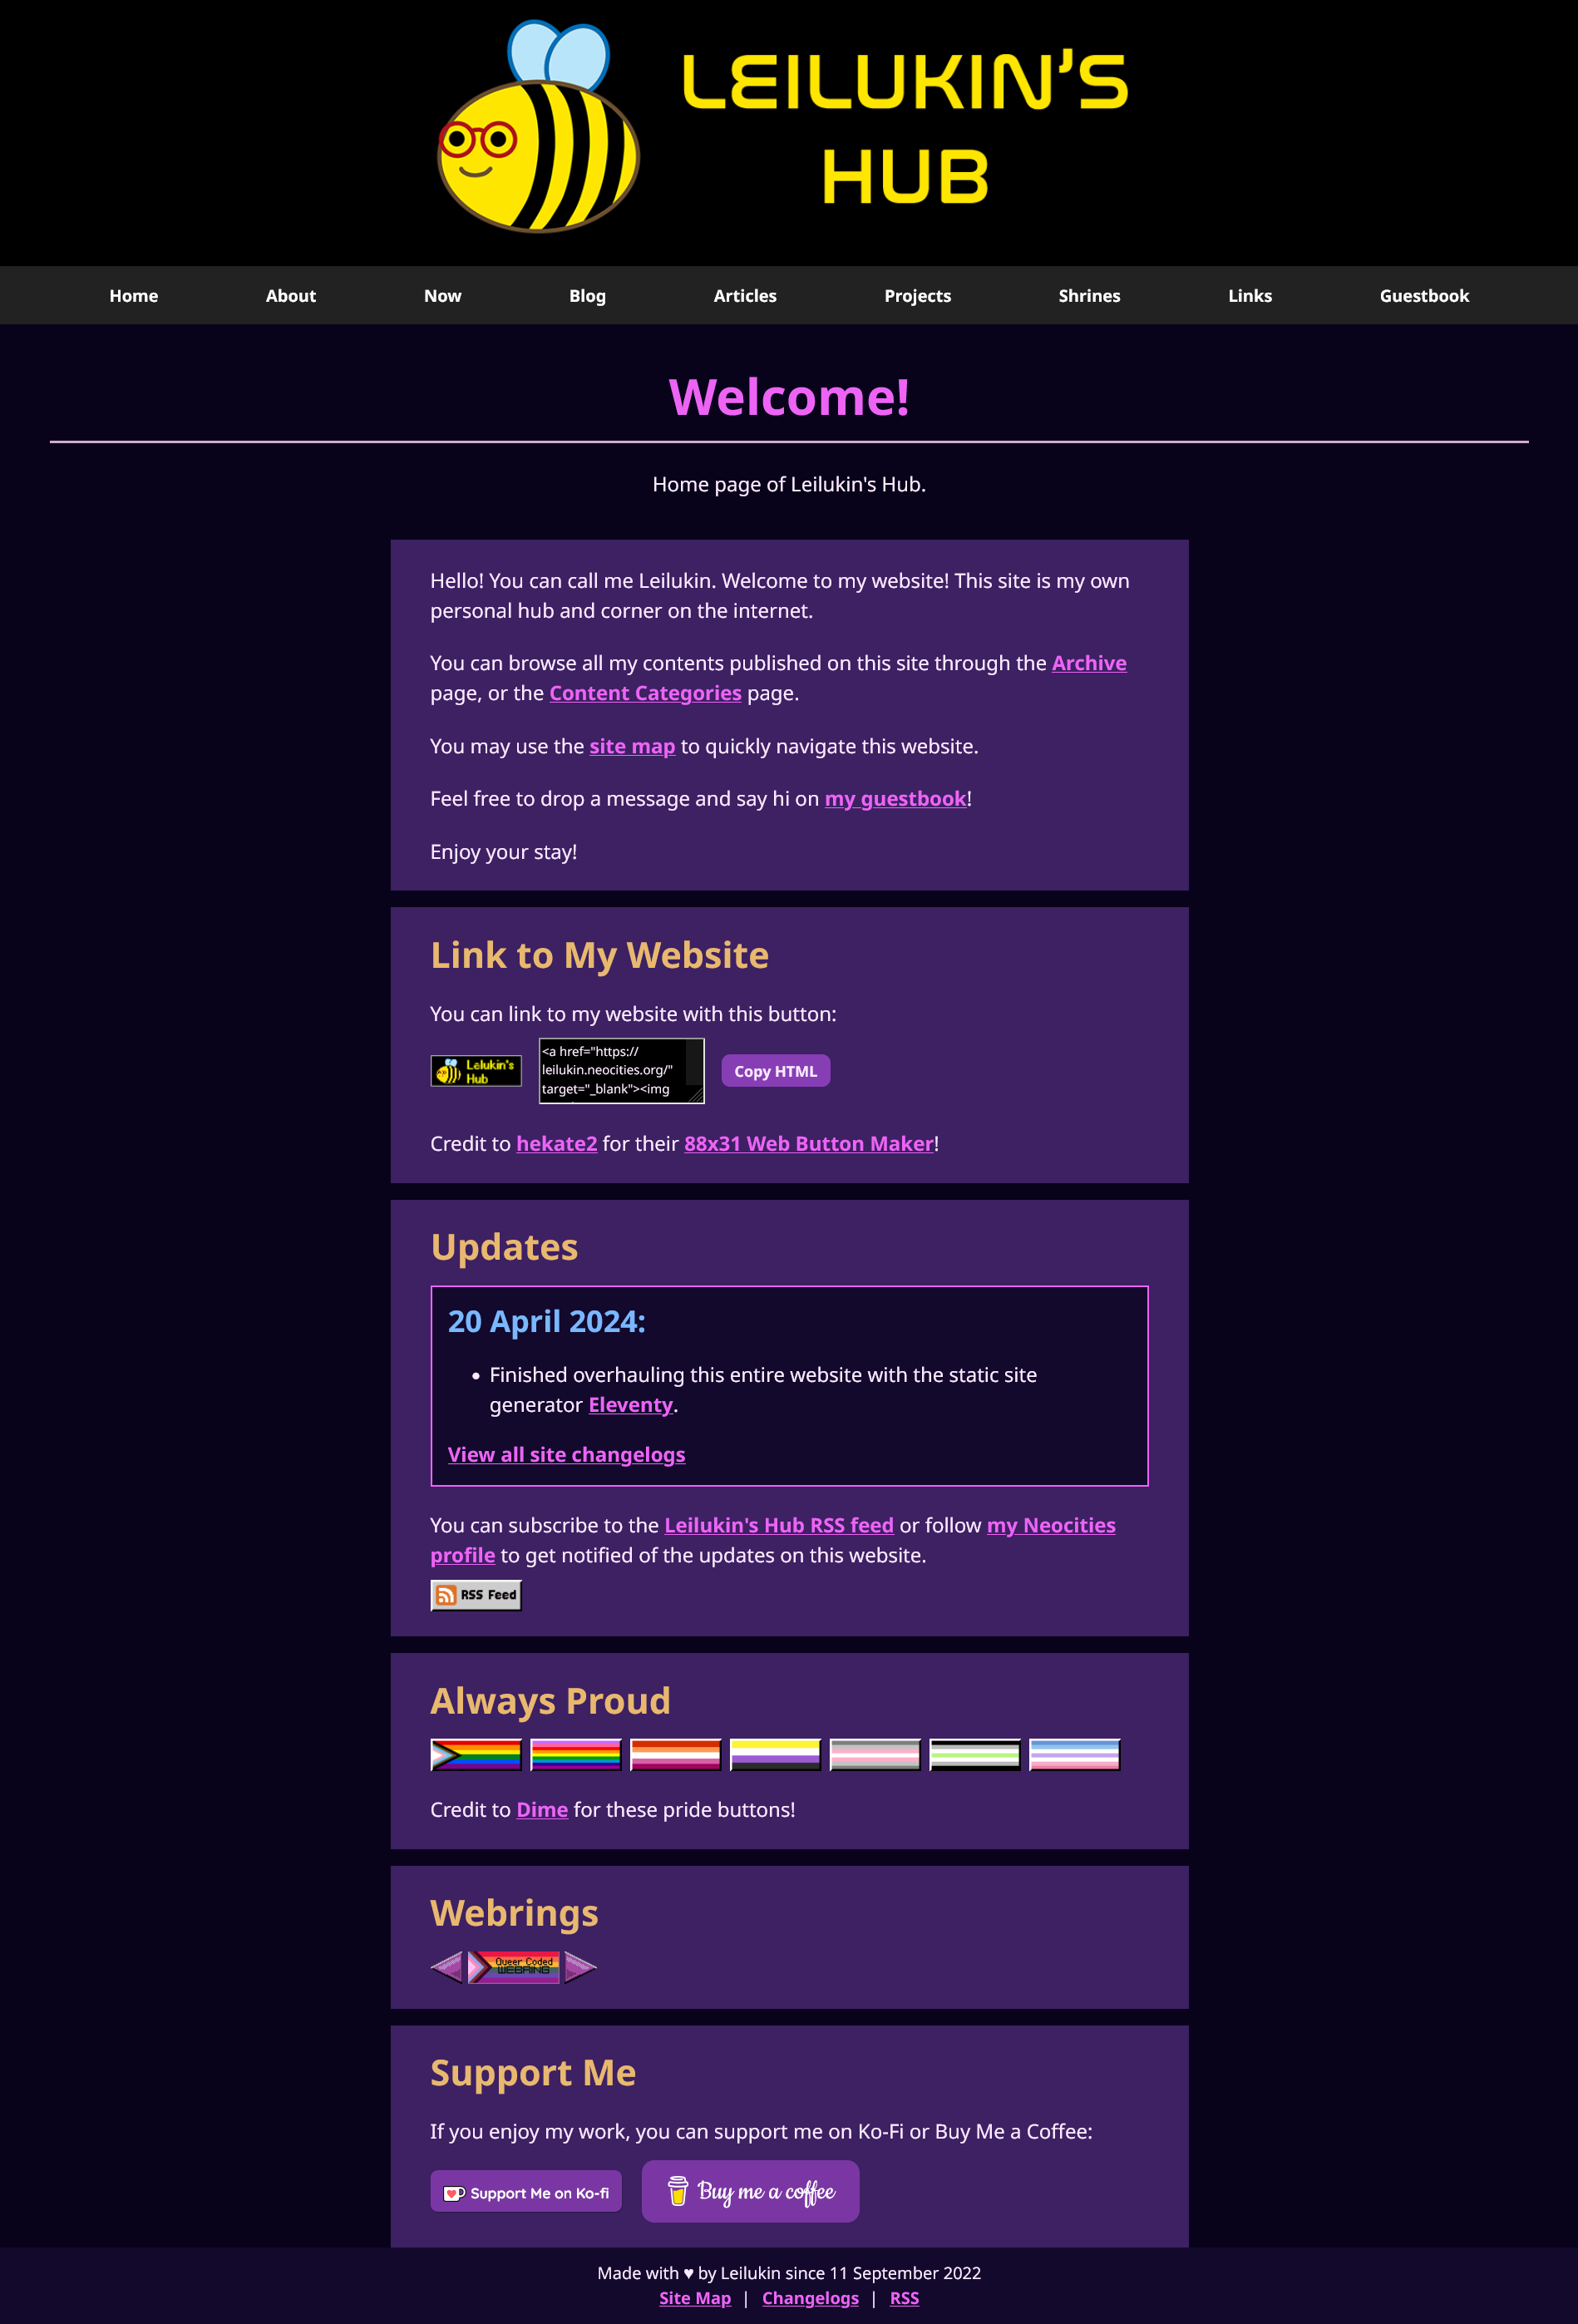 Leilukin's Hub home page on 11 September 2023